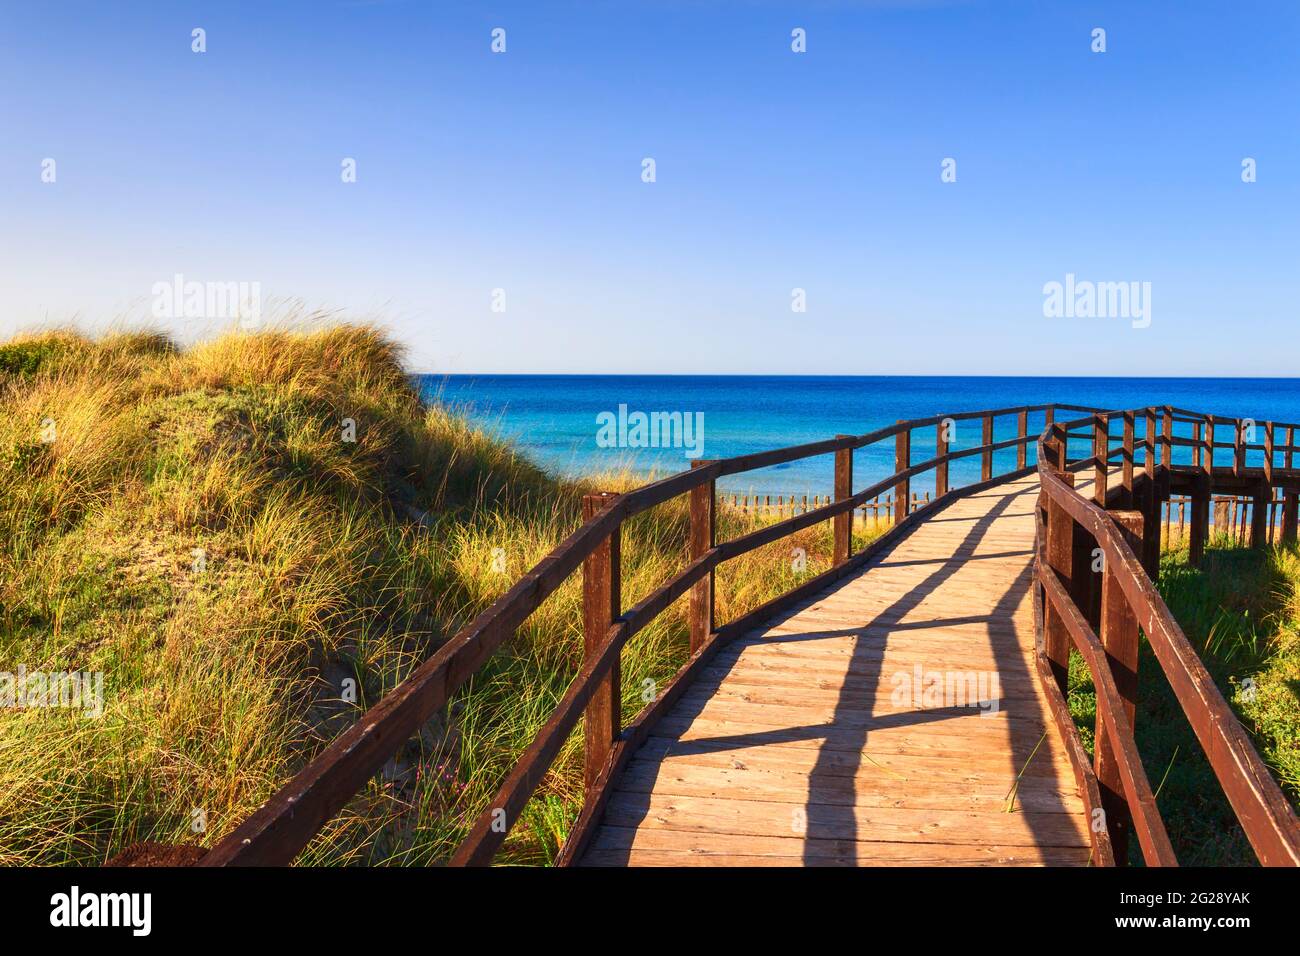 The Regional Natural Park Dune Costiere (Torre Canne): fence between sea dunes, Apulia (Italy). Stock Photo